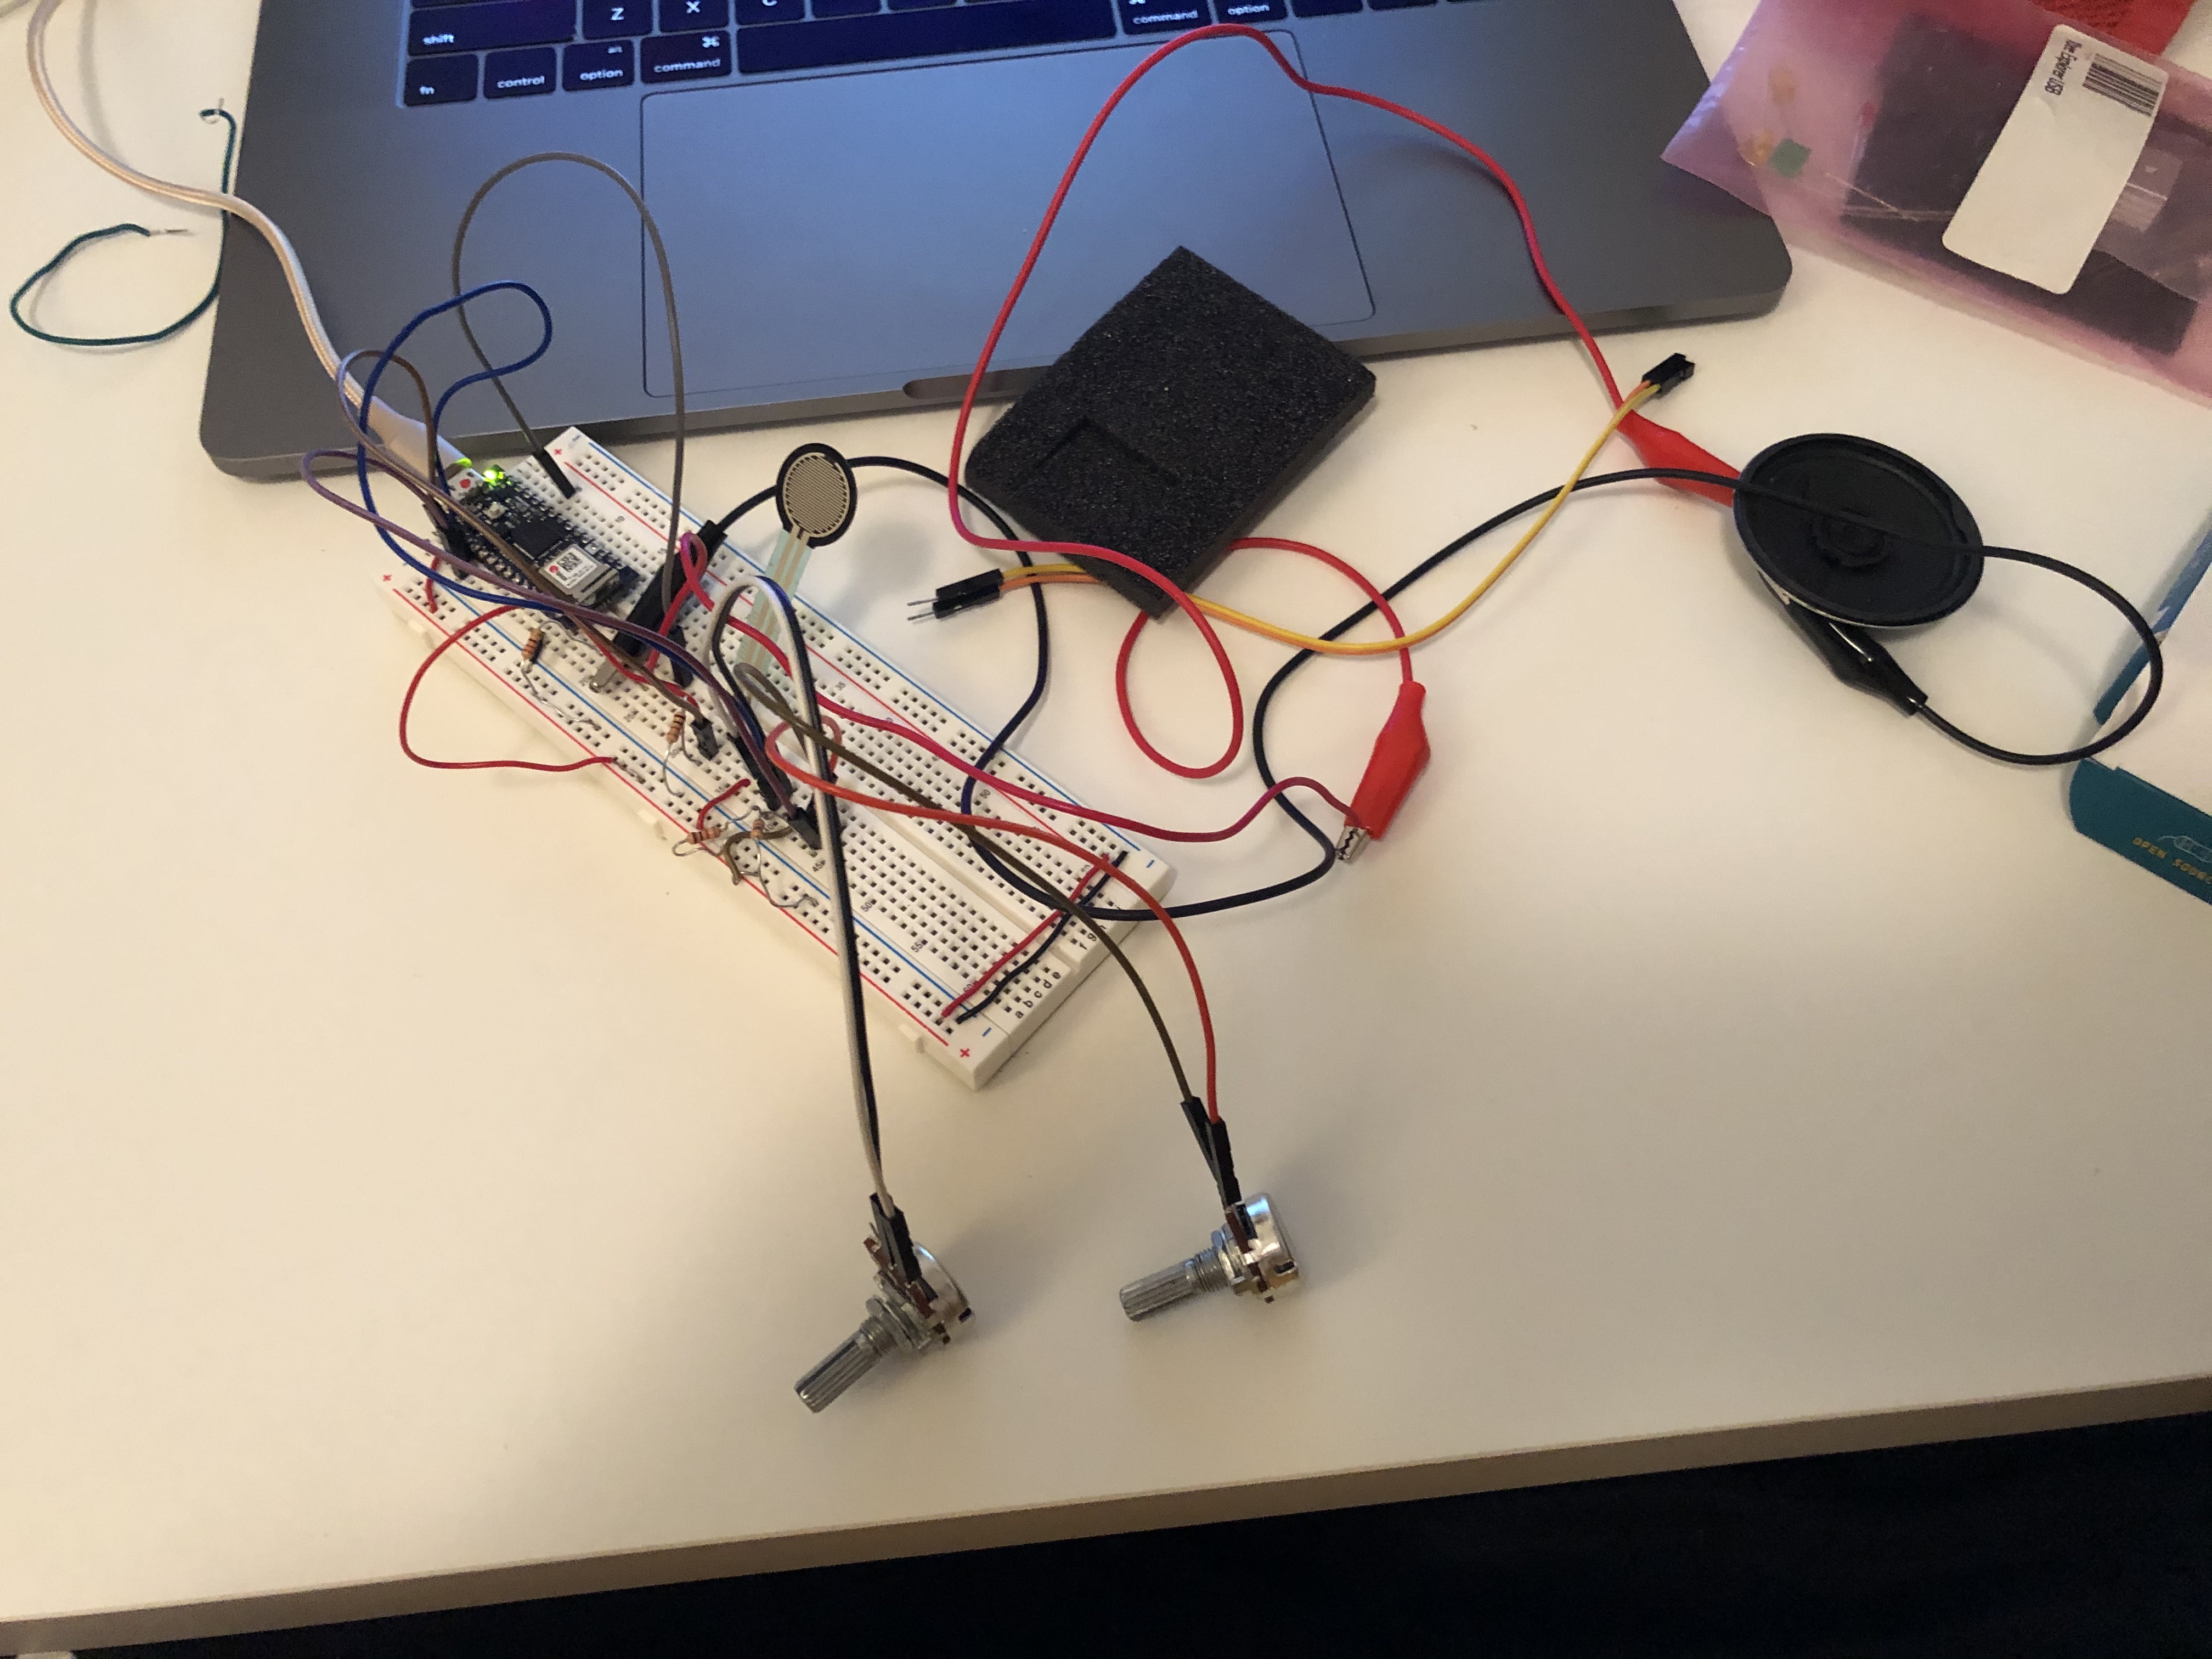 Attempt Two at creating a musical instrument using breadboard and three analog sensors